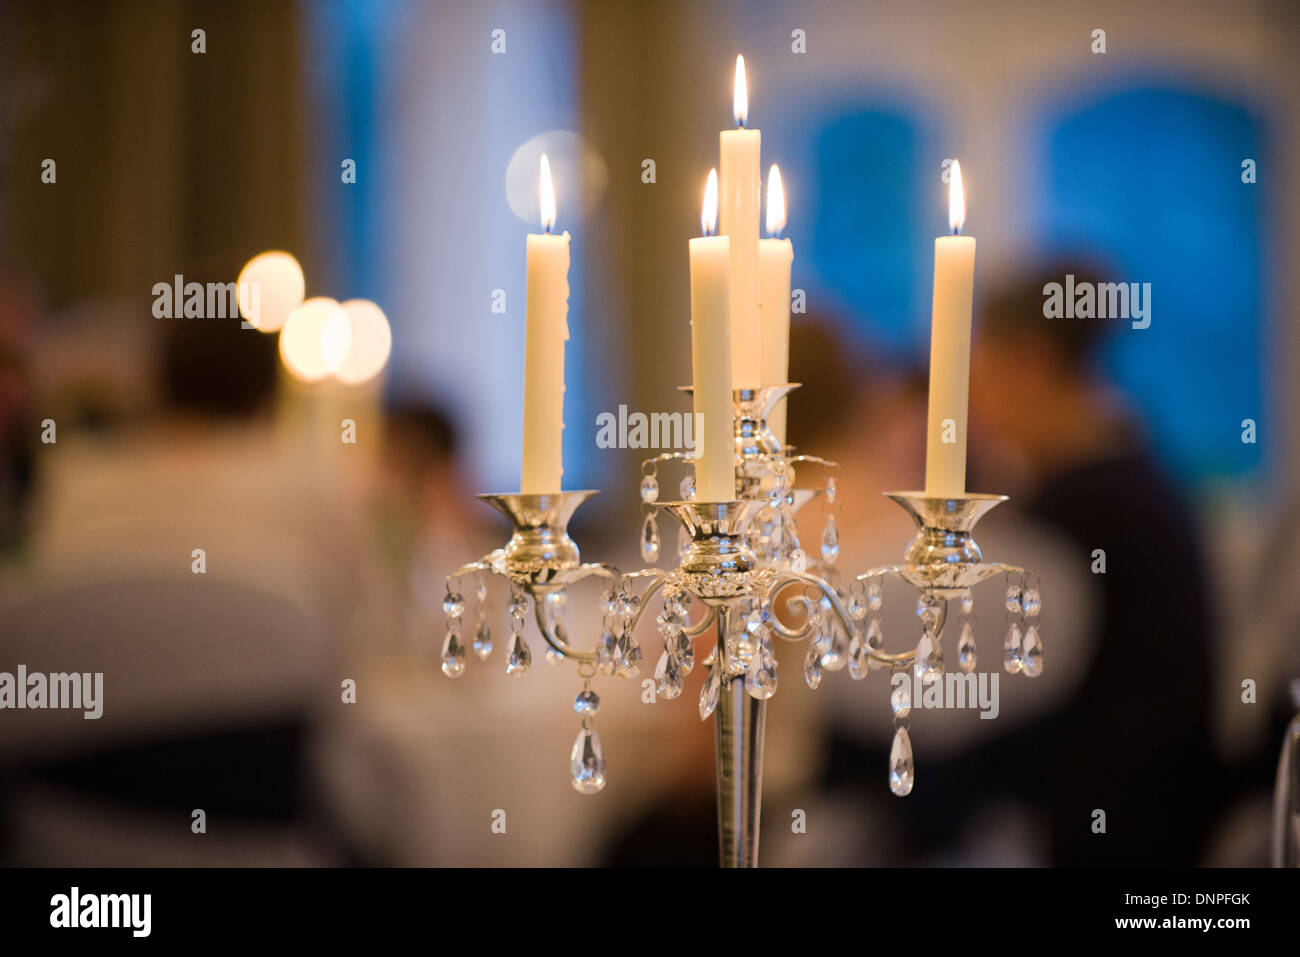 Candlestick at a wedding reception, function, occasion, bit of a do, people, happy, celebration, flame, danger, hazard, Stock Photo